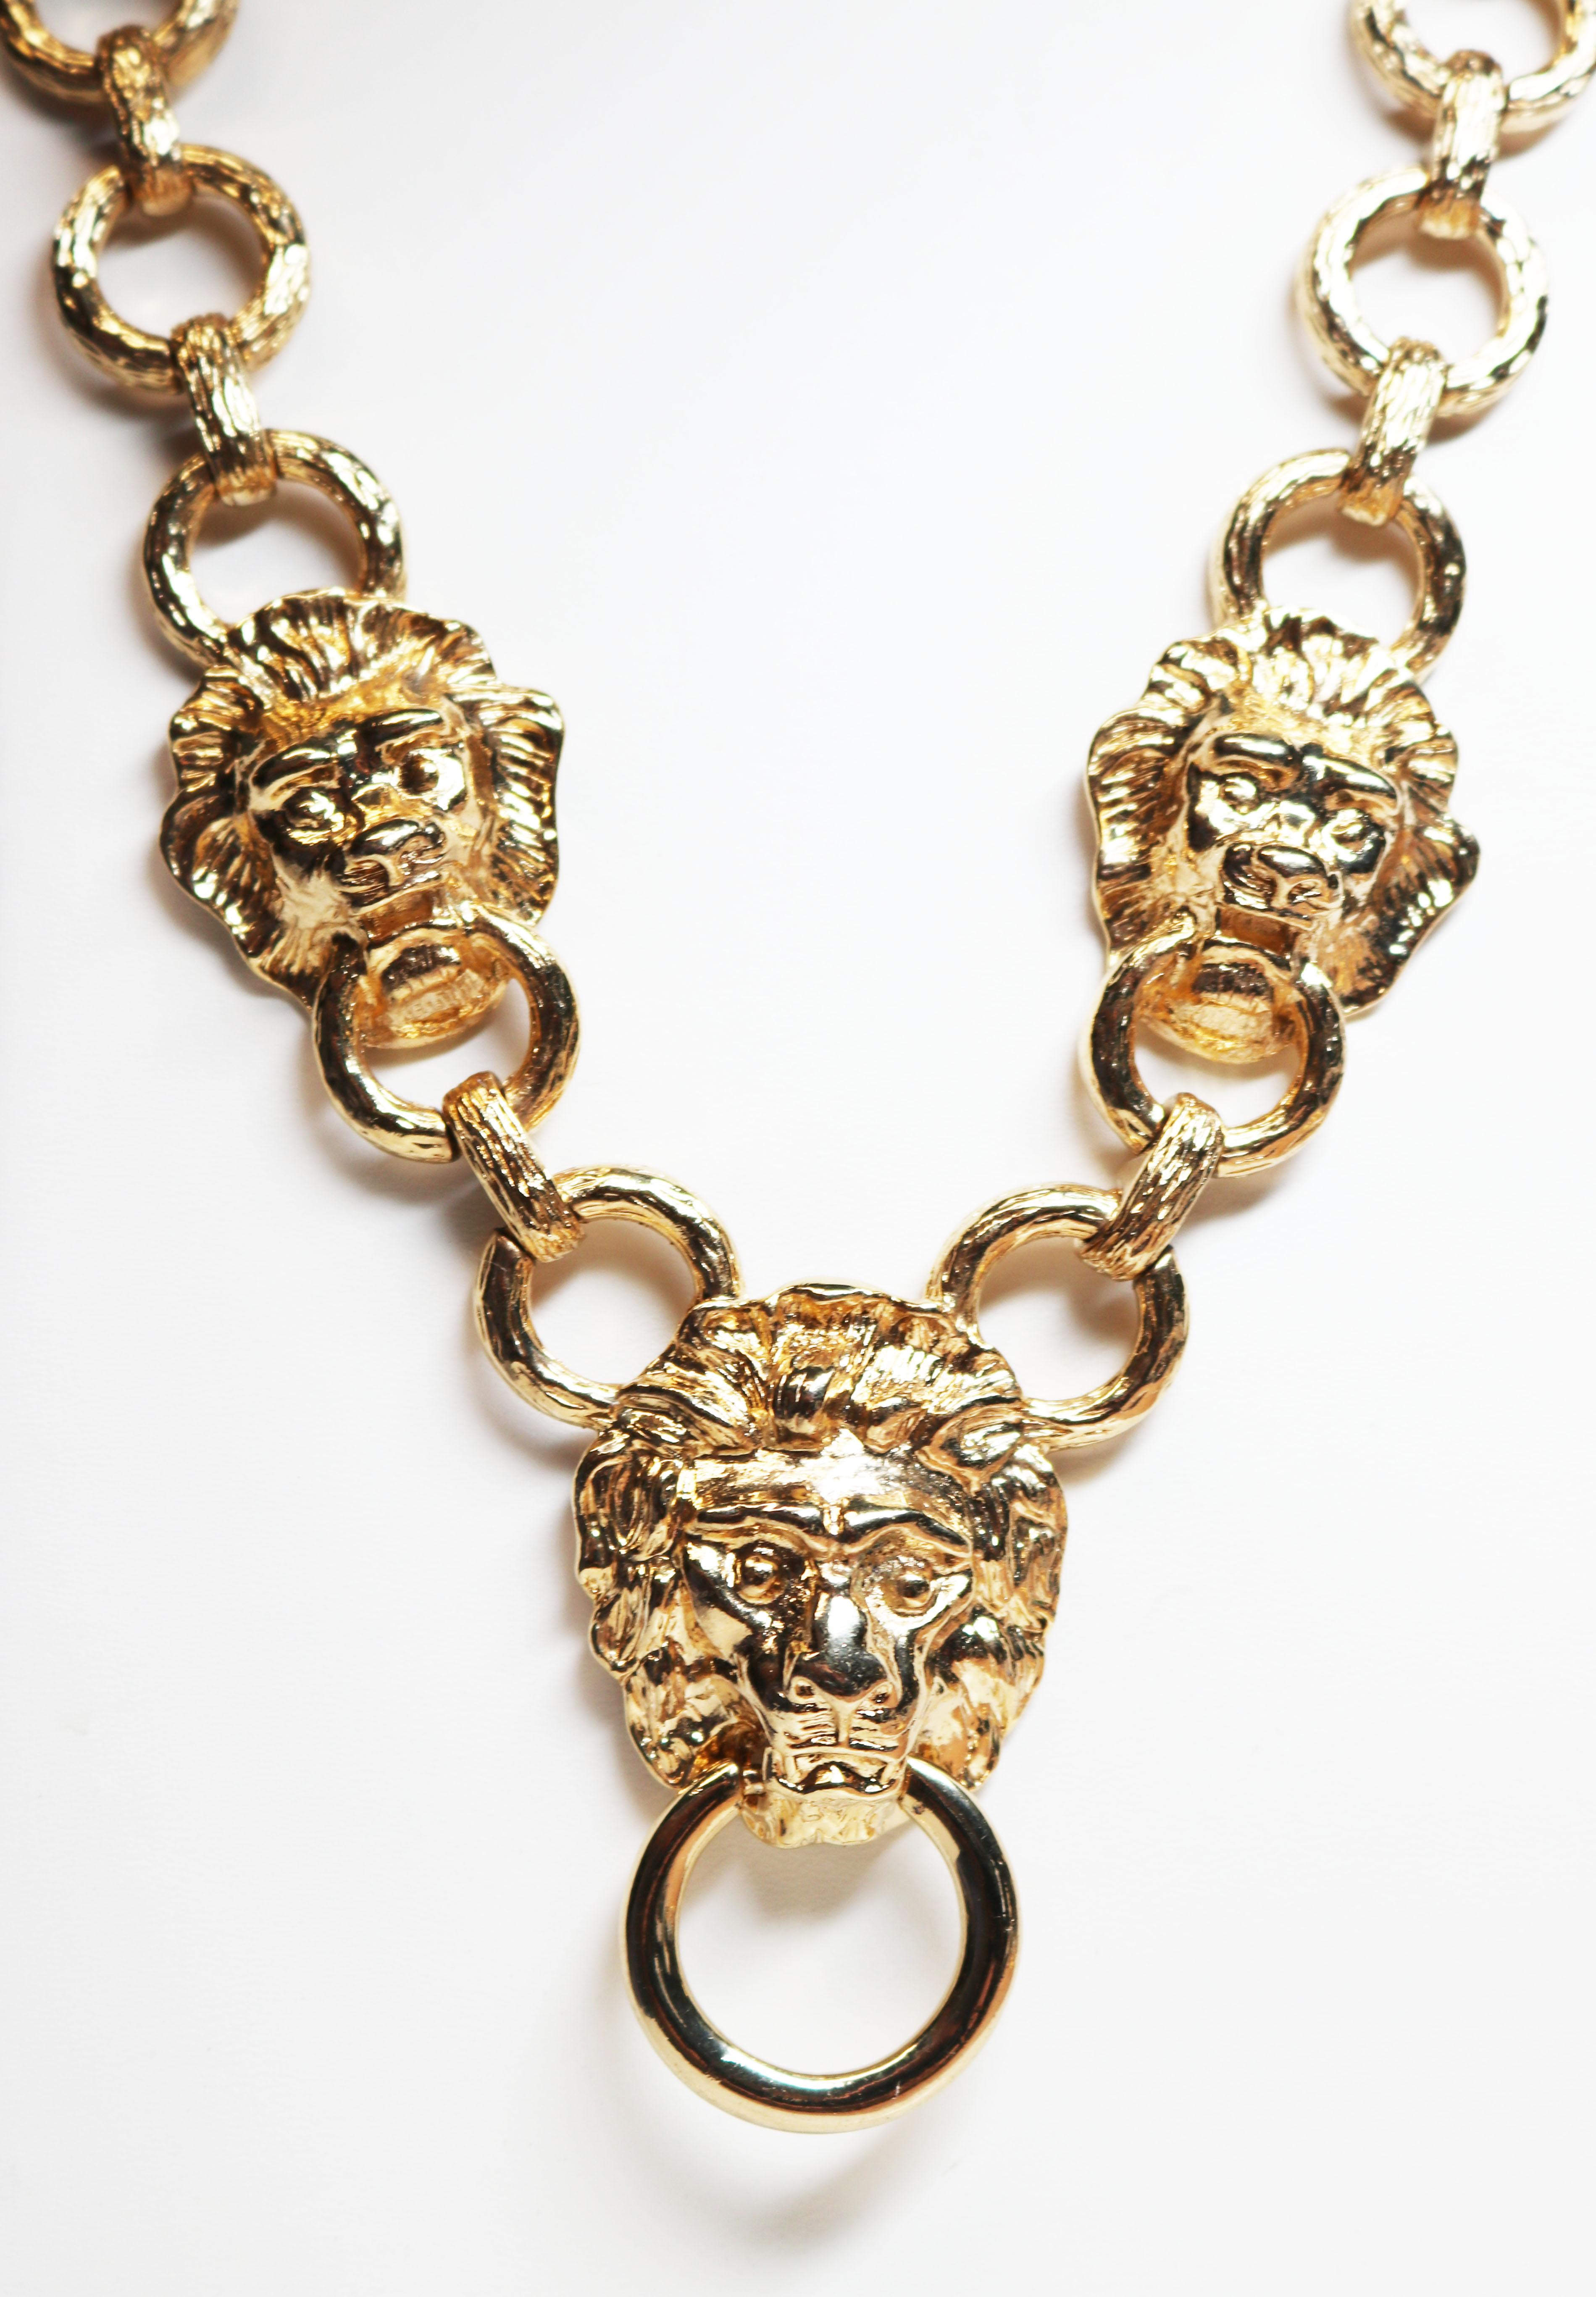 Kenneth Jay Lane Lion's Head Doorknocker Necklace In Good Condition For Sale In Mastic Beach, NY